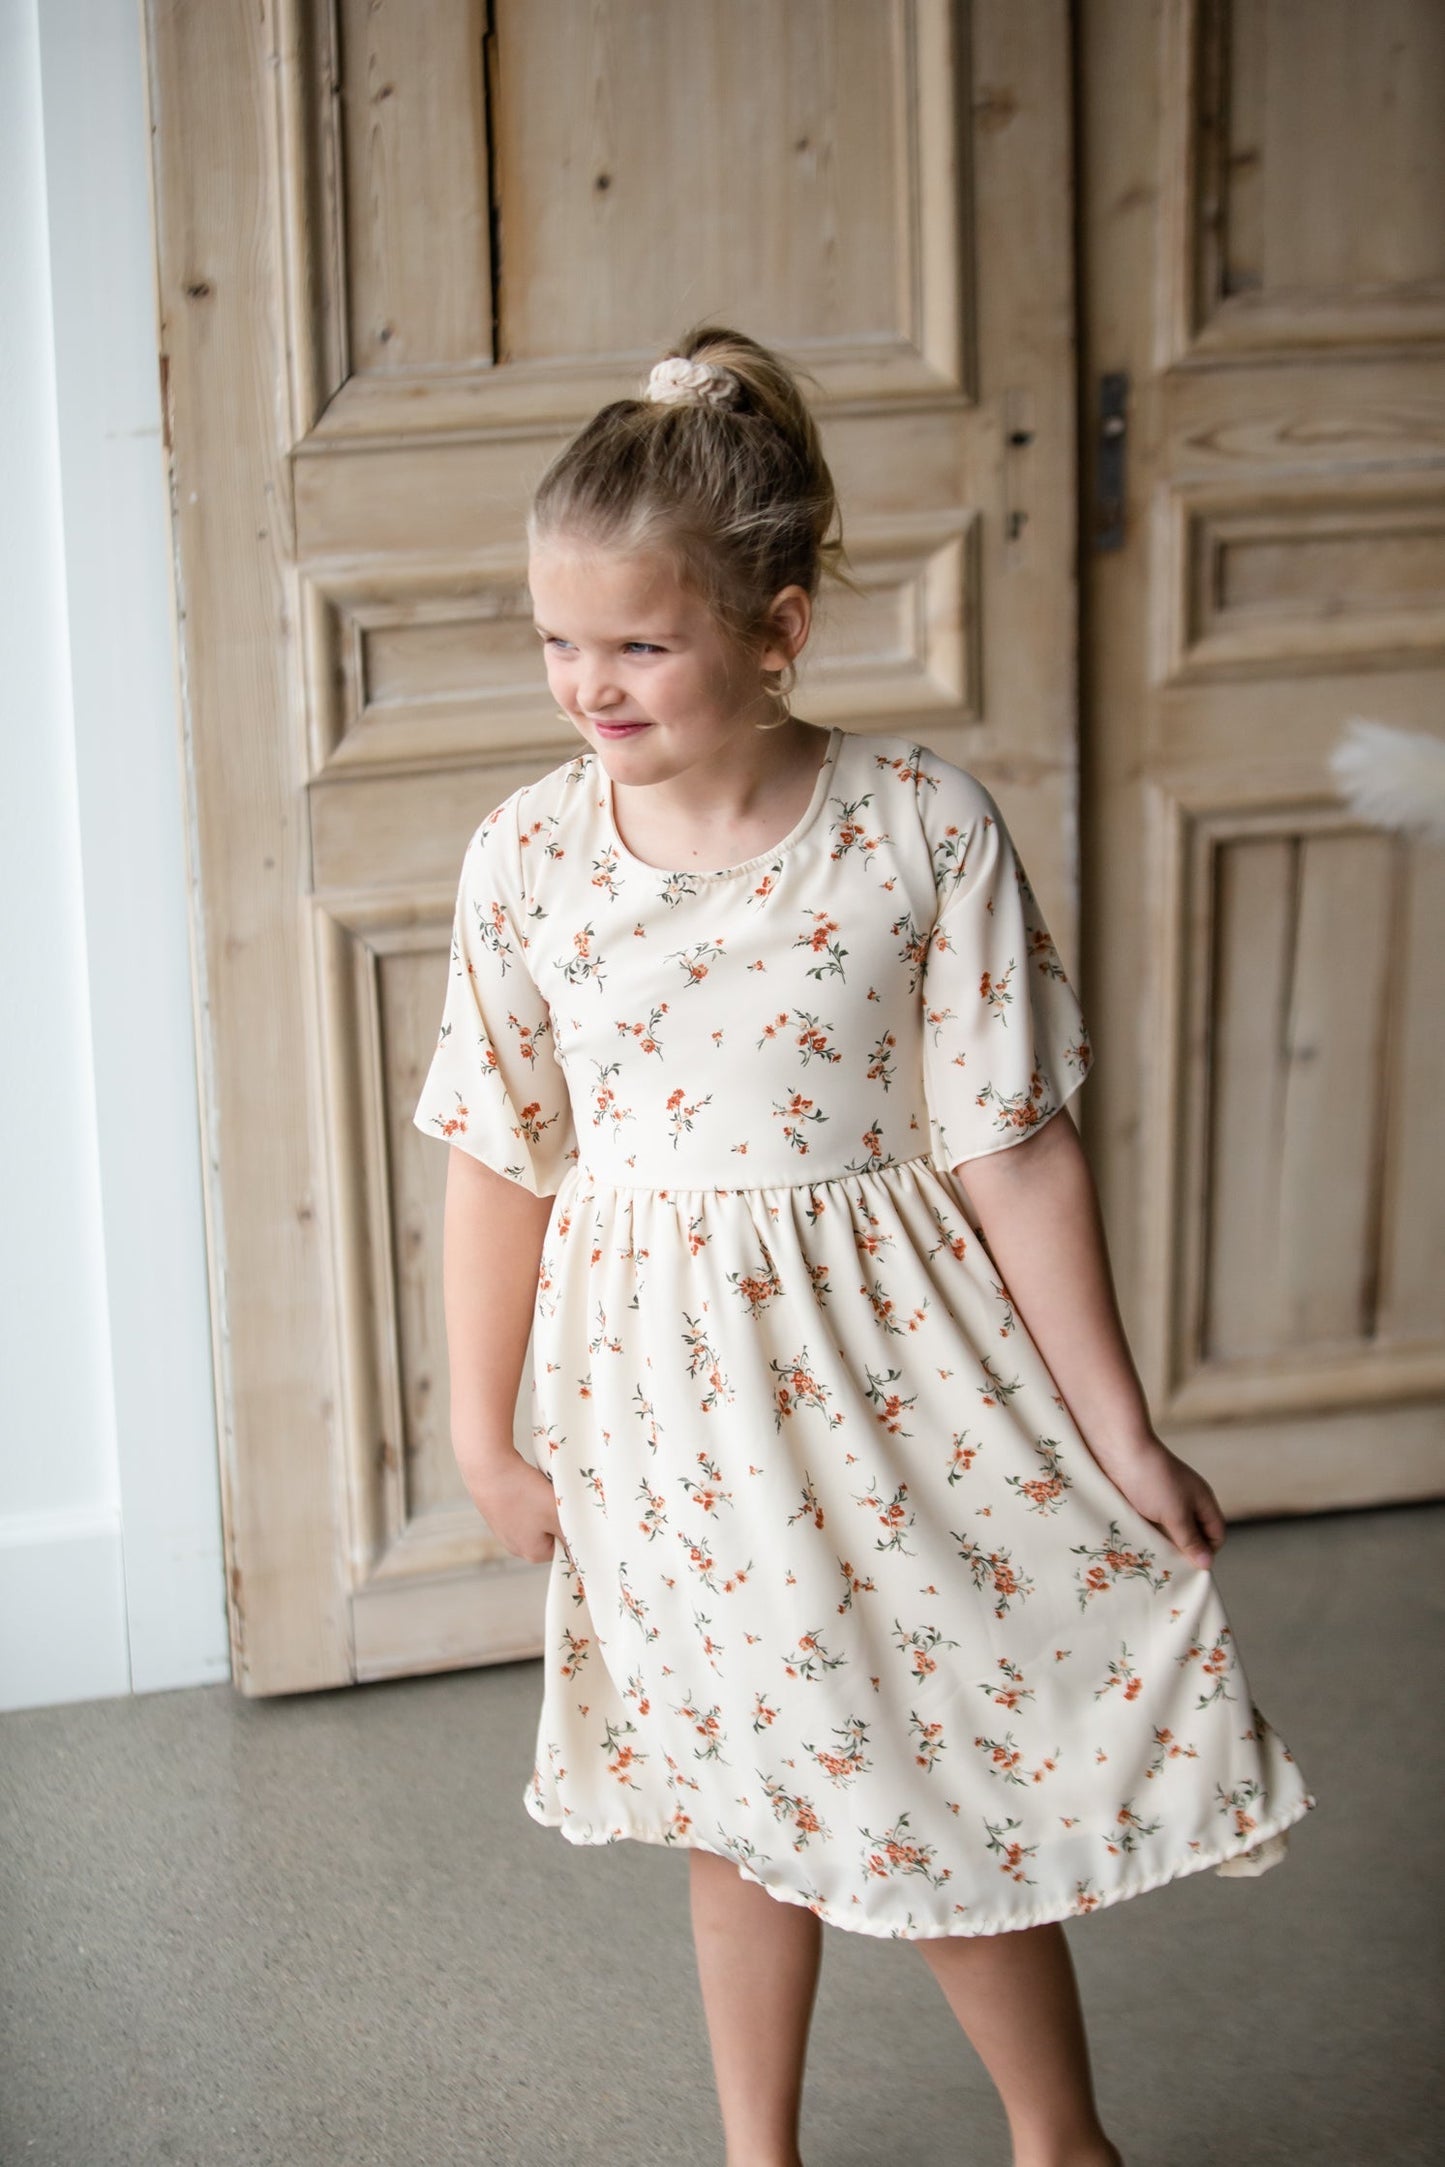 The Floral Print Girls Dress Girls Woodmouse + Thistle